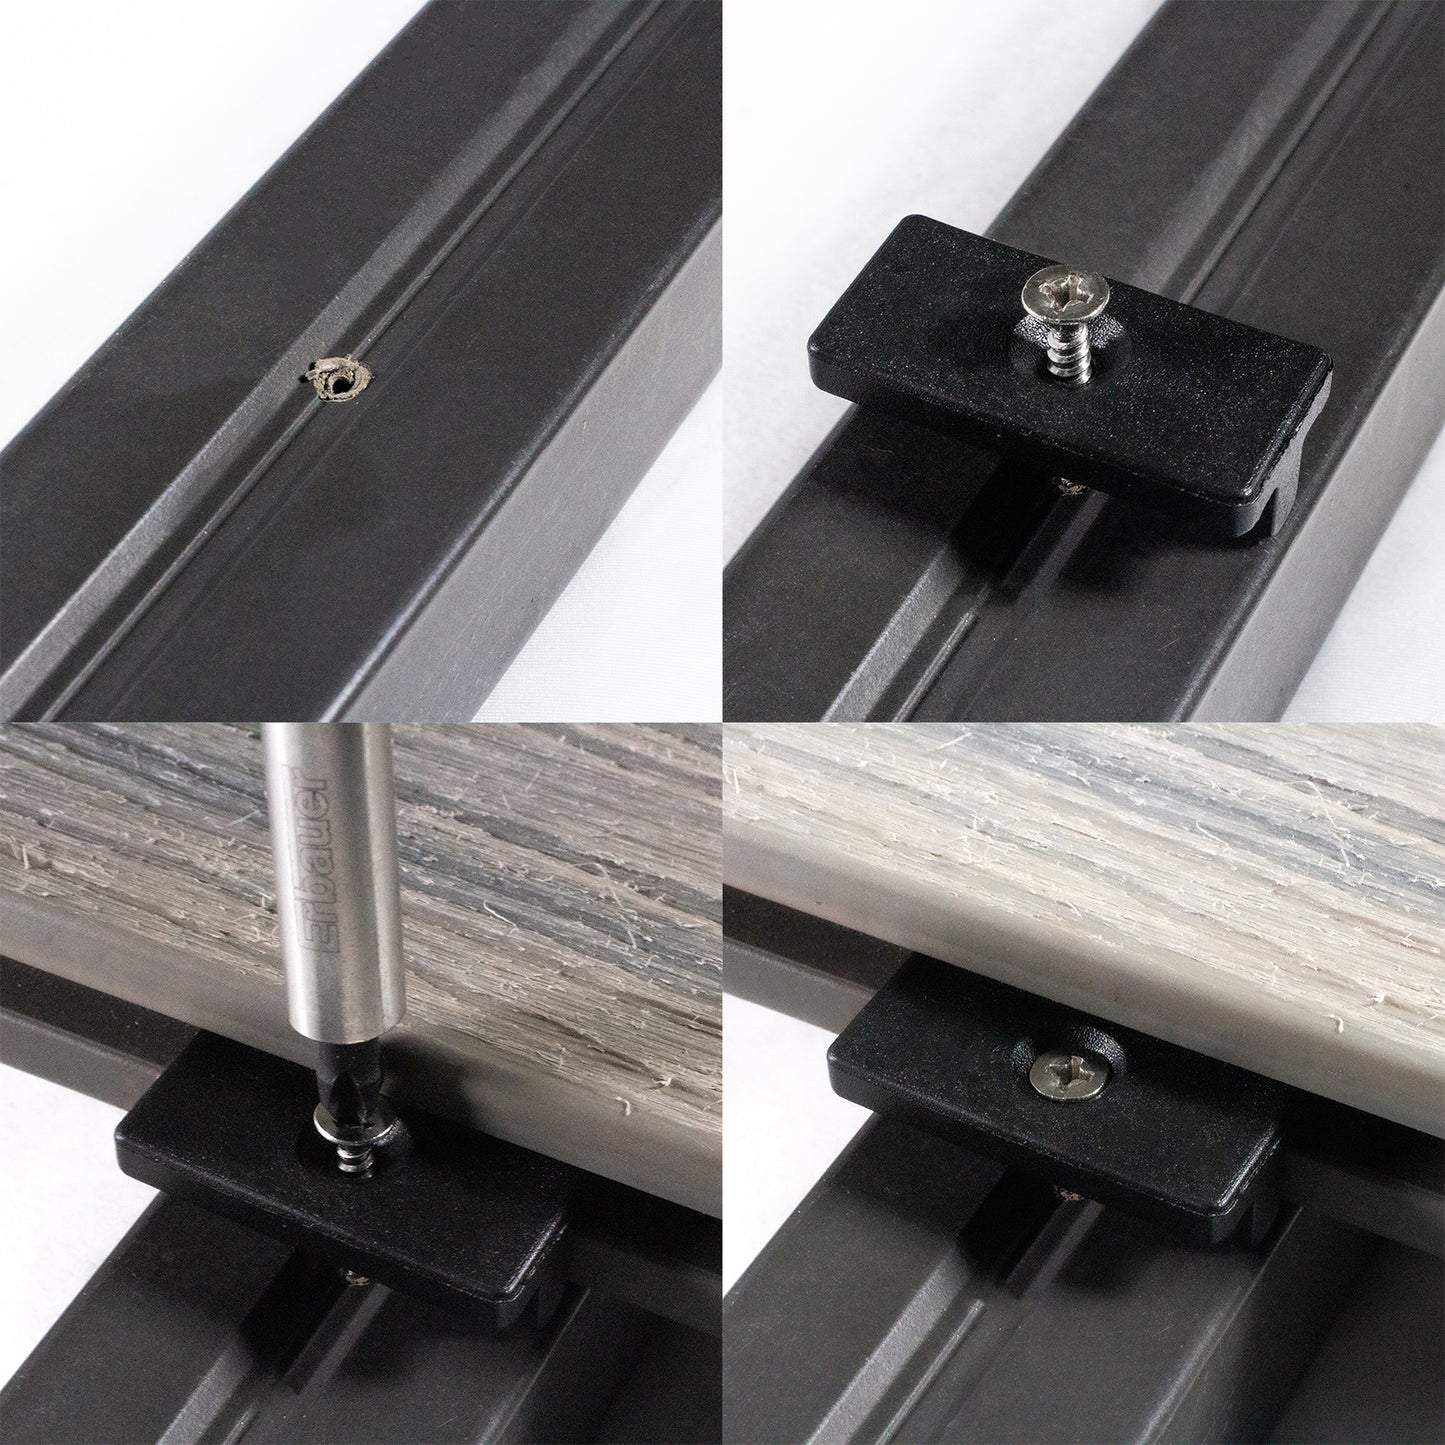 EasyComposite™ WPC Composite Decking Full Kit including fixings trims joists